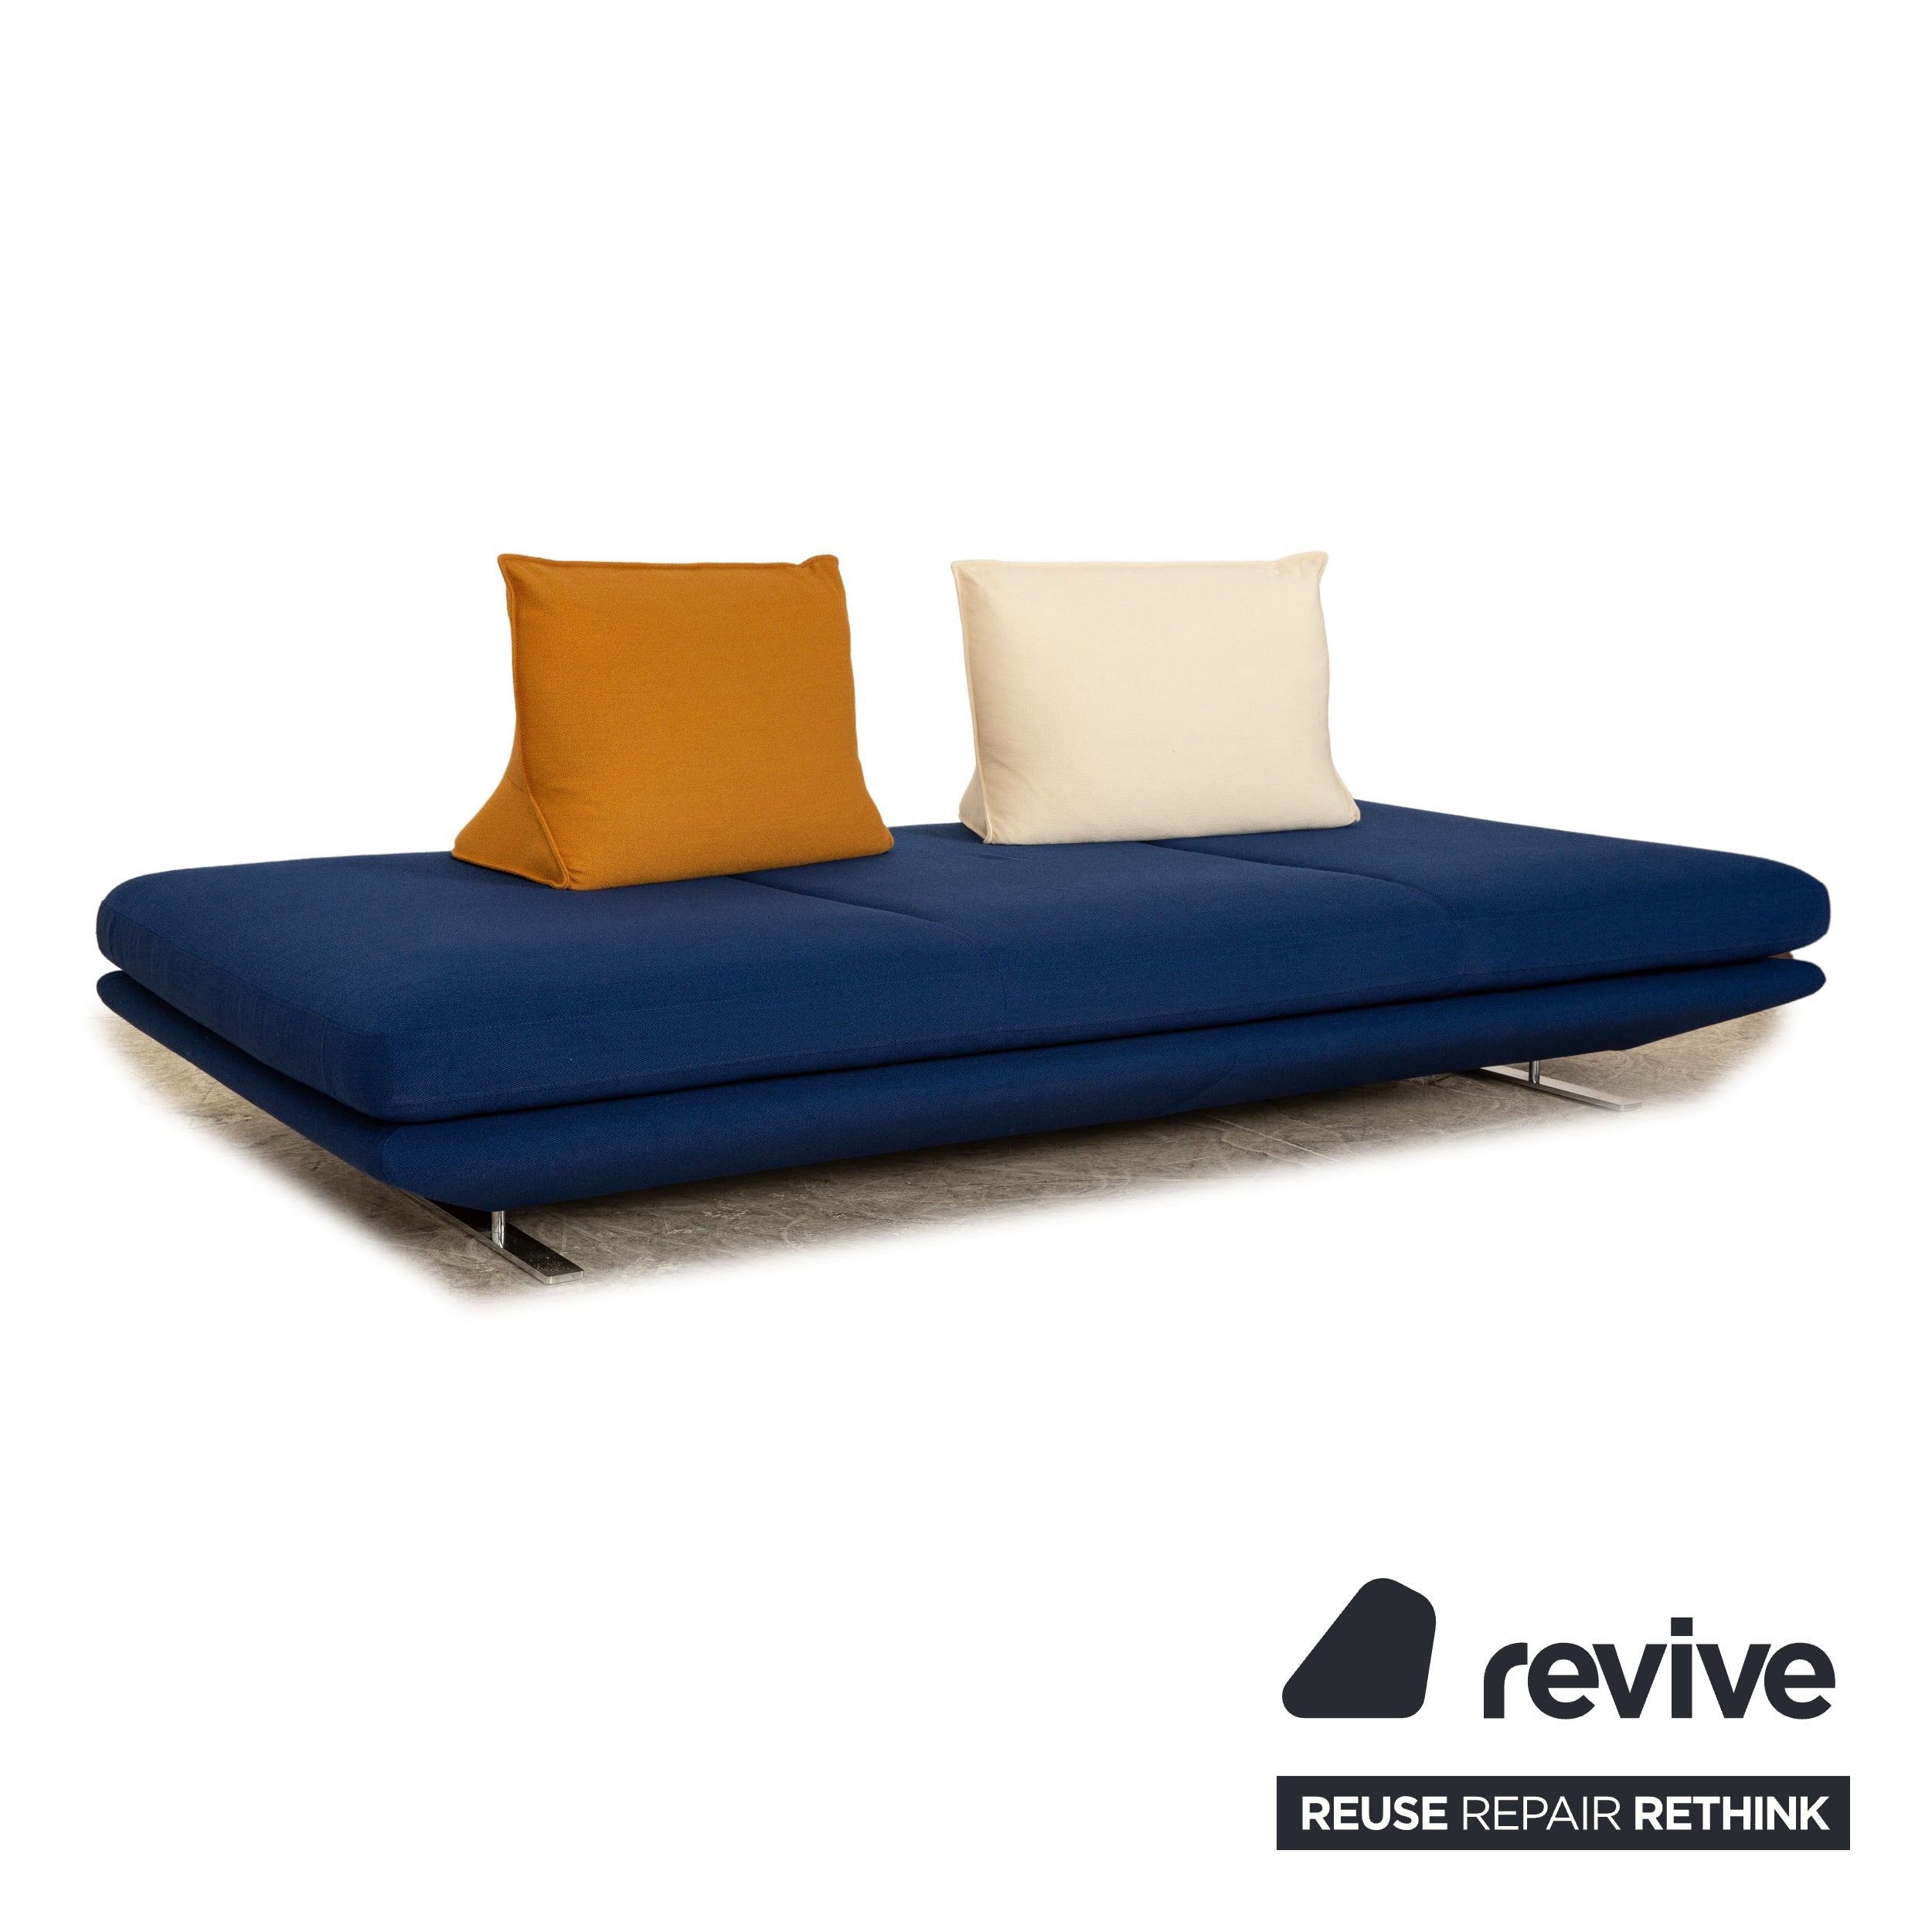 Ligne roset Prado fabric two seater blue manual function sofa couch